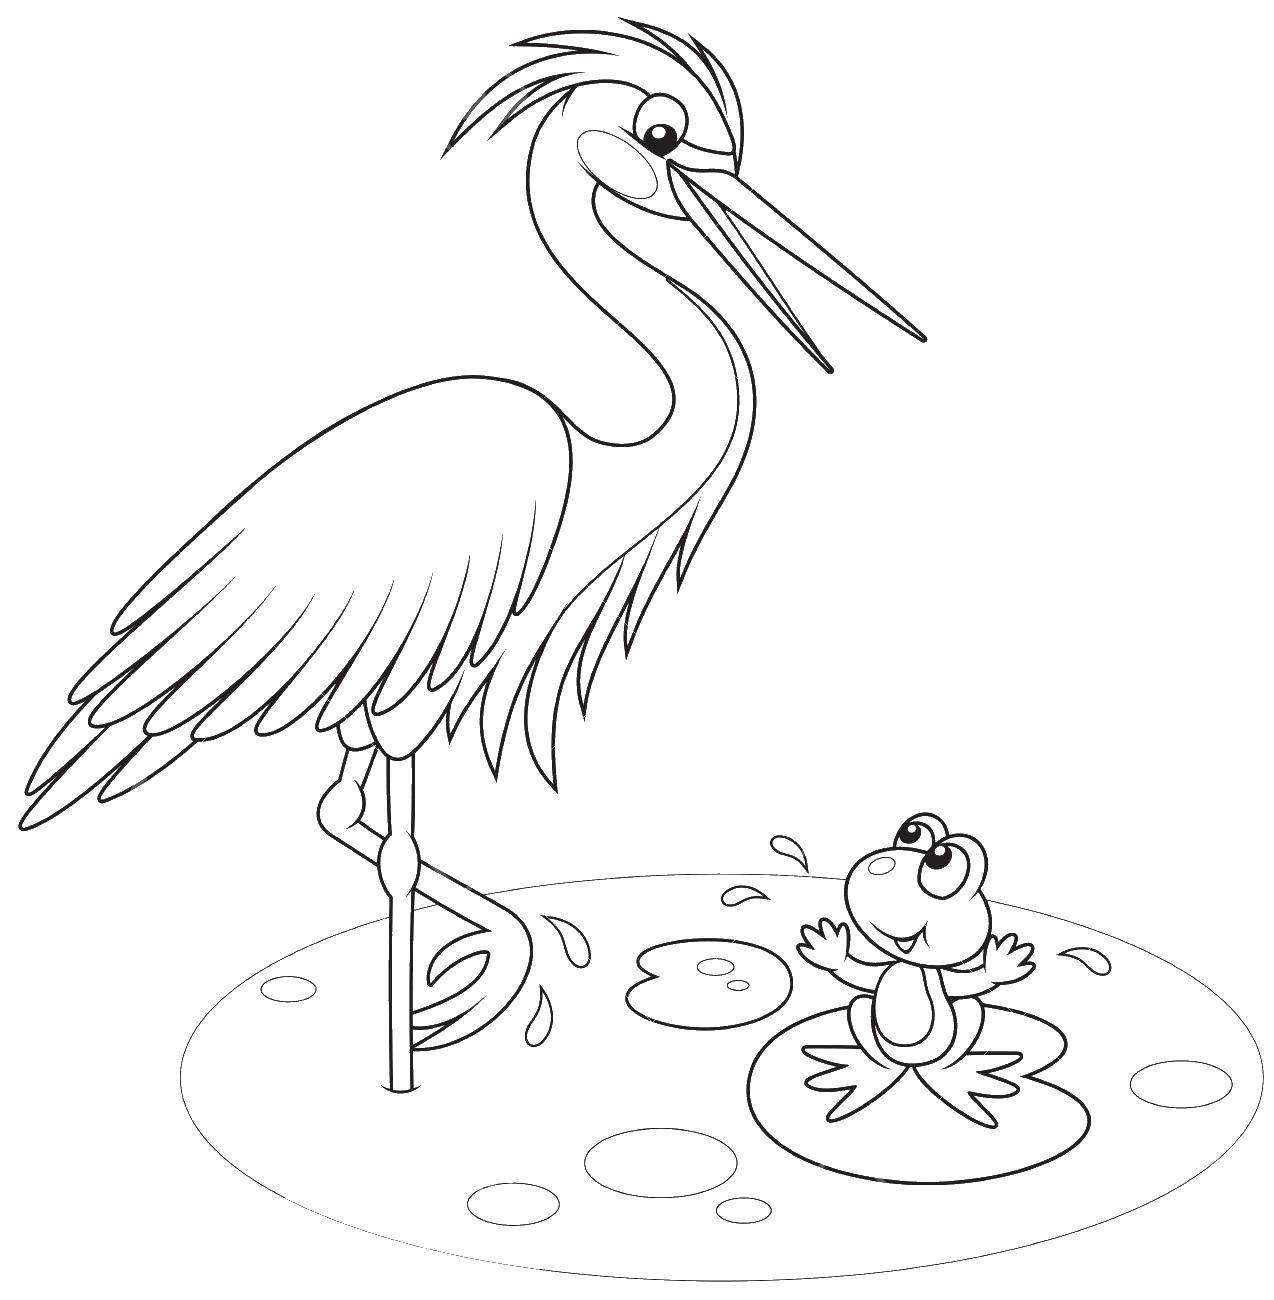 Coloring The Heron and the frog.. Category birds. Tags:  Birds, Heron.